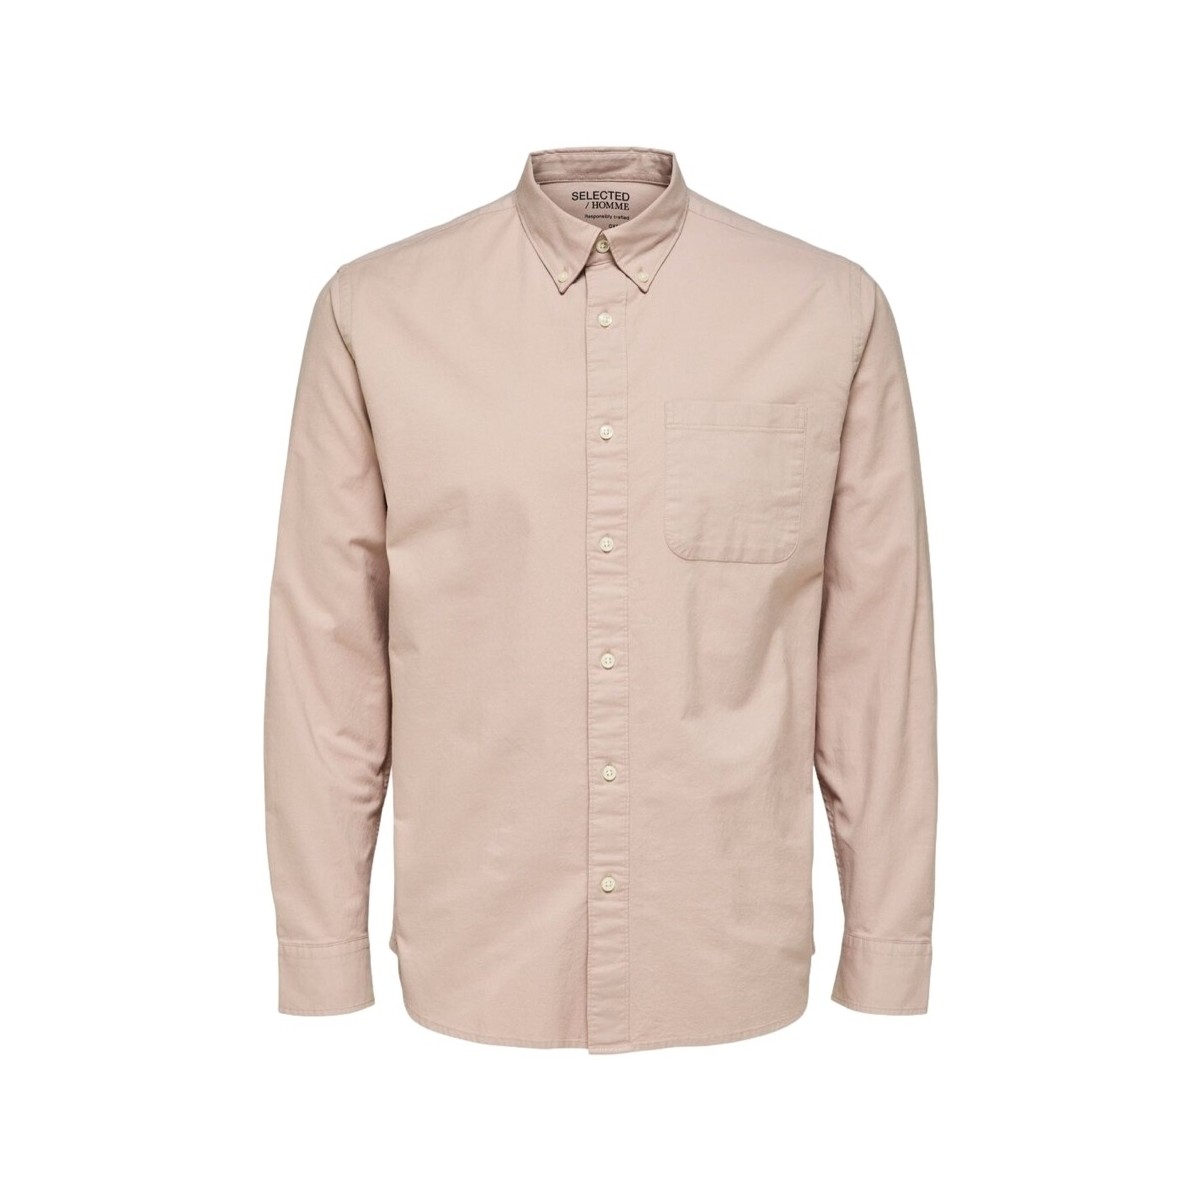 Vêtements Homme Chemises manches longues Selected Noos Regrick Oxford Shirt - Shadow Gray Rose